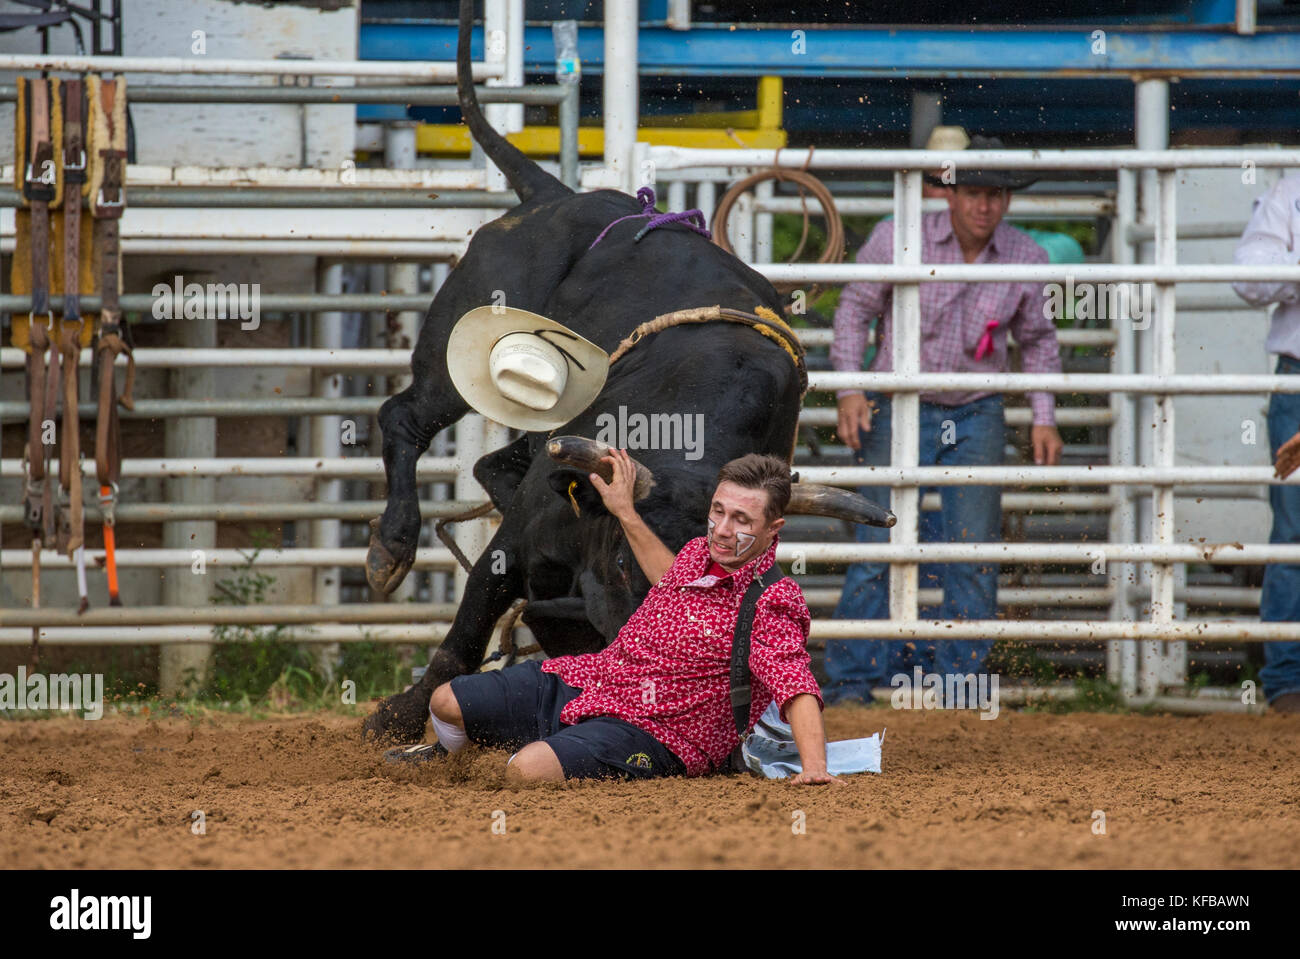 Bull chasing a rodeo clown after throwing its rider in the 4th Annual Fall PRCA Rodeo in Arcadia Florida Stock Photo